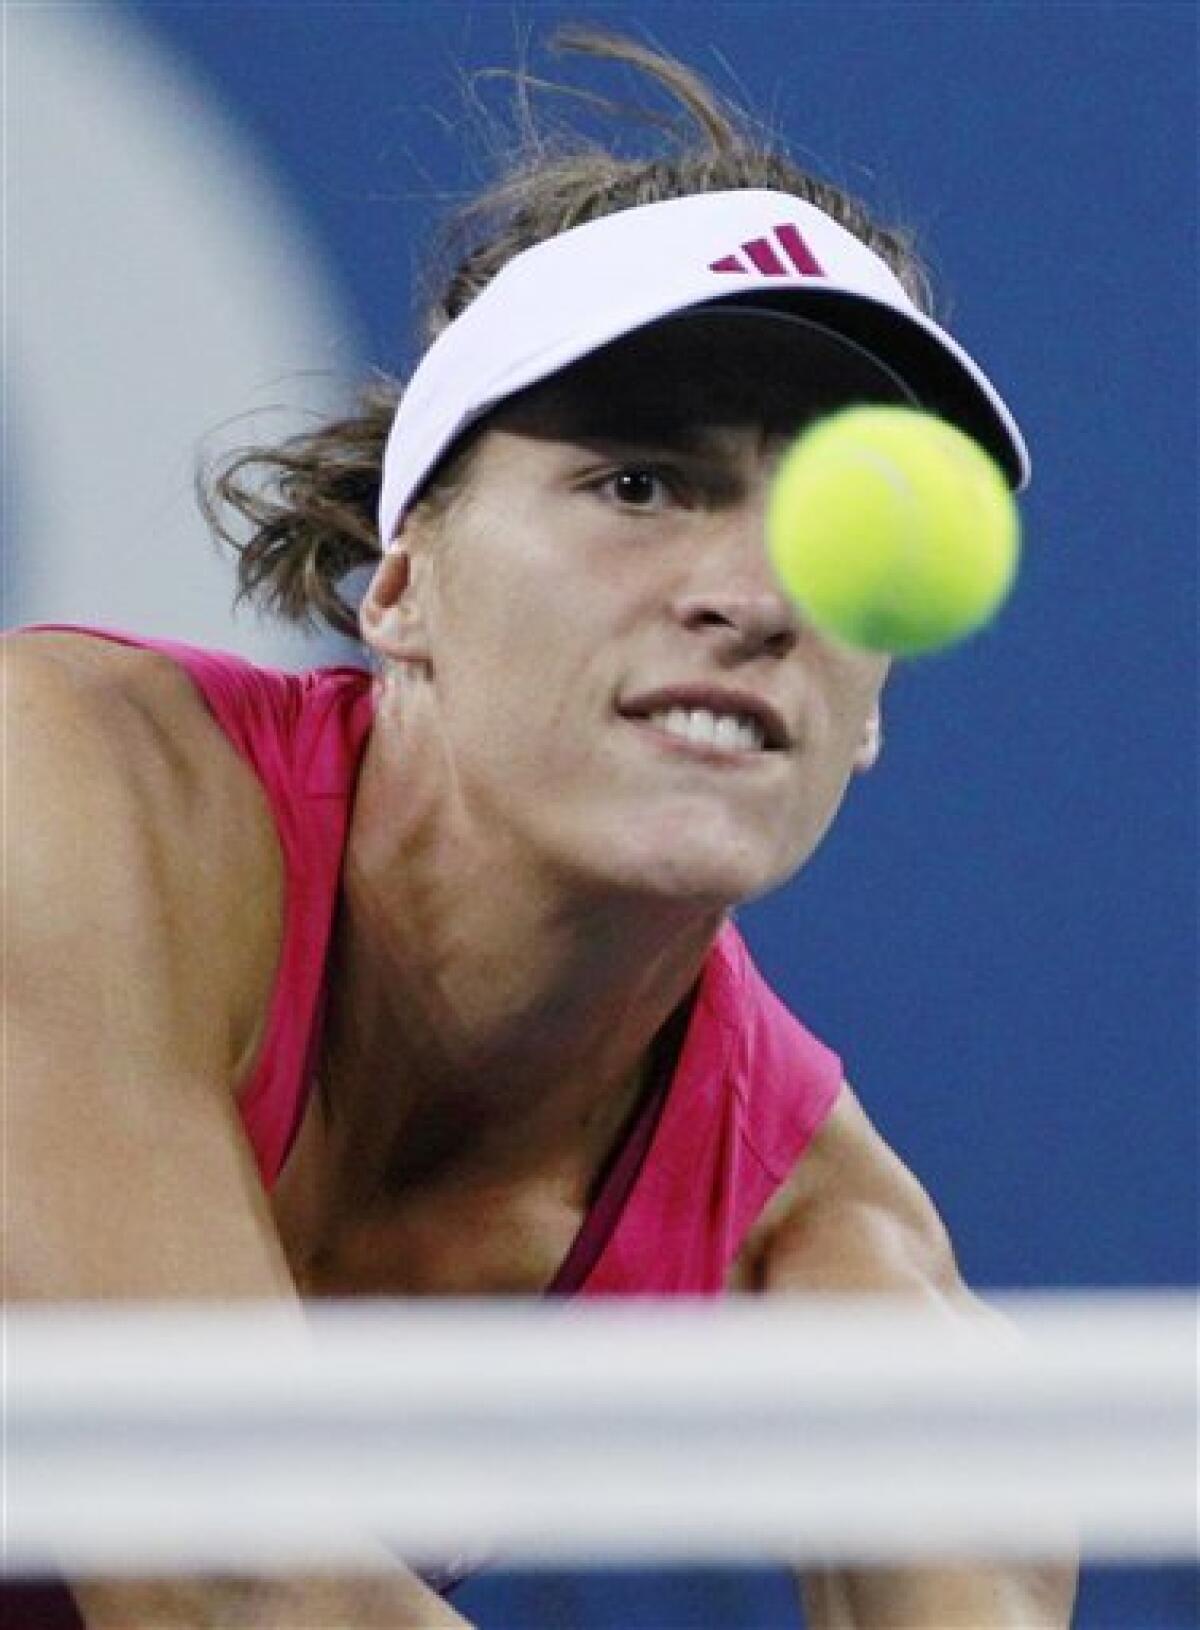 Andrea Petkovic, of Germany, keeps her eyes on the ball as she drops a shot over the net against Vera Zvonareva, of Russia, at the U.S. Open tennis tournament in New York, Monday, Sept. 6, 2010.(AP Photo/Charles Krupa)